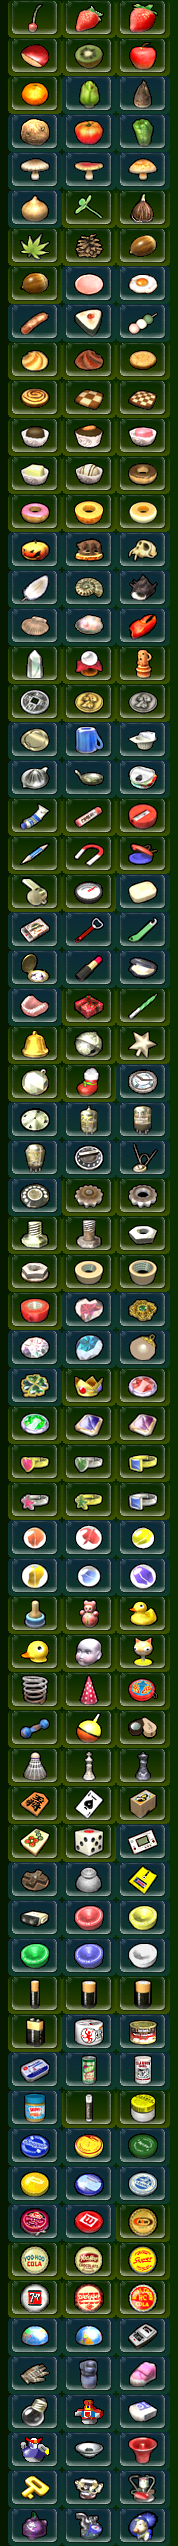 A complete list of items in the Treasure Hoard.